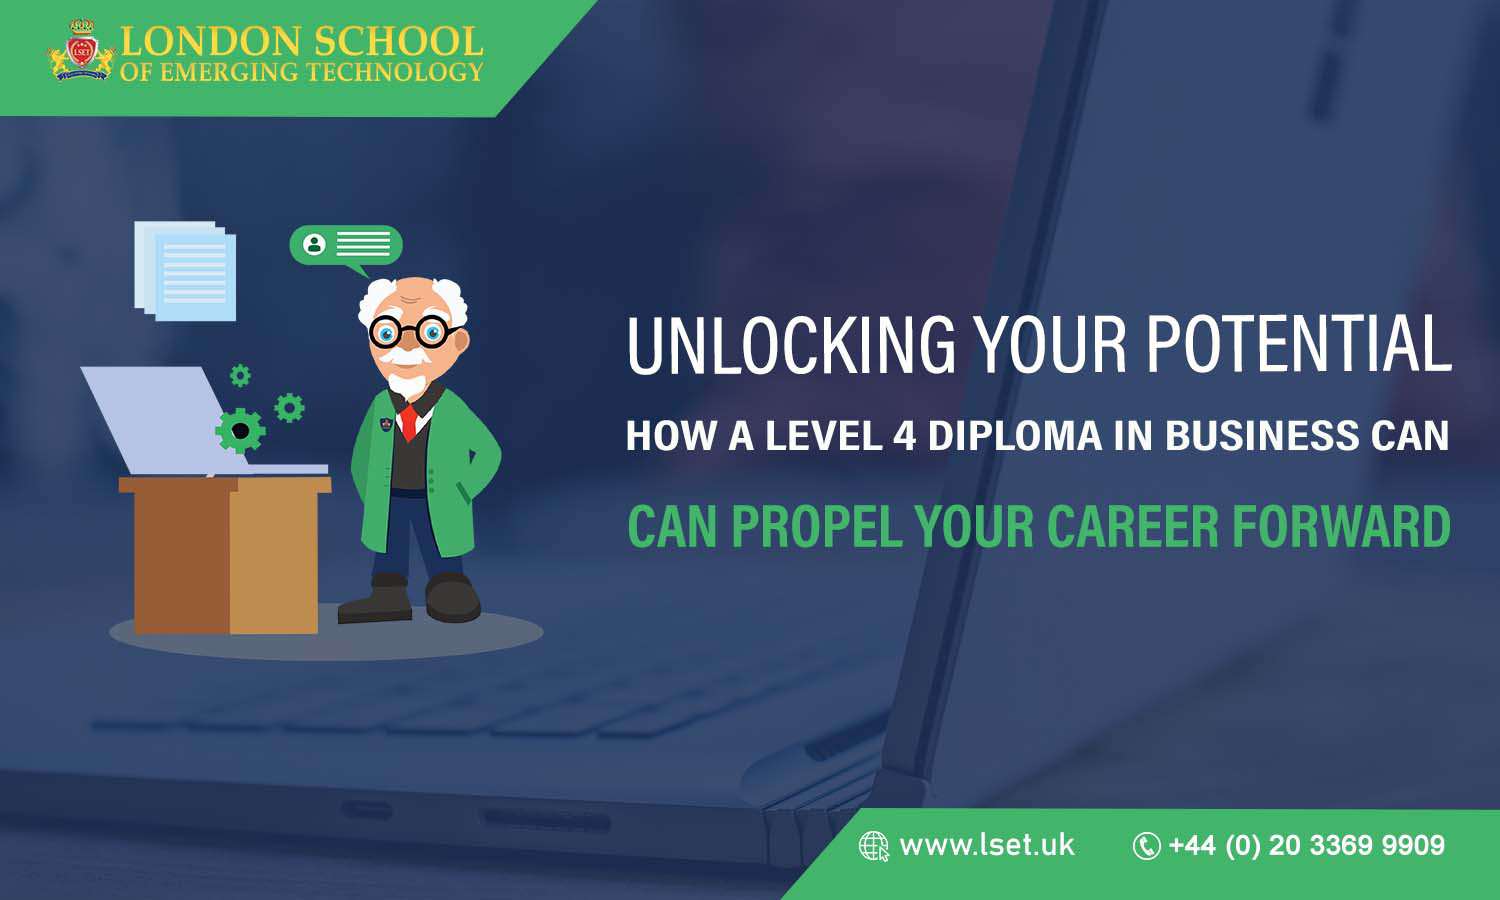 Unlocking Your Potential How a Level 4 Diploma in Business Can Propel Your Career Forward